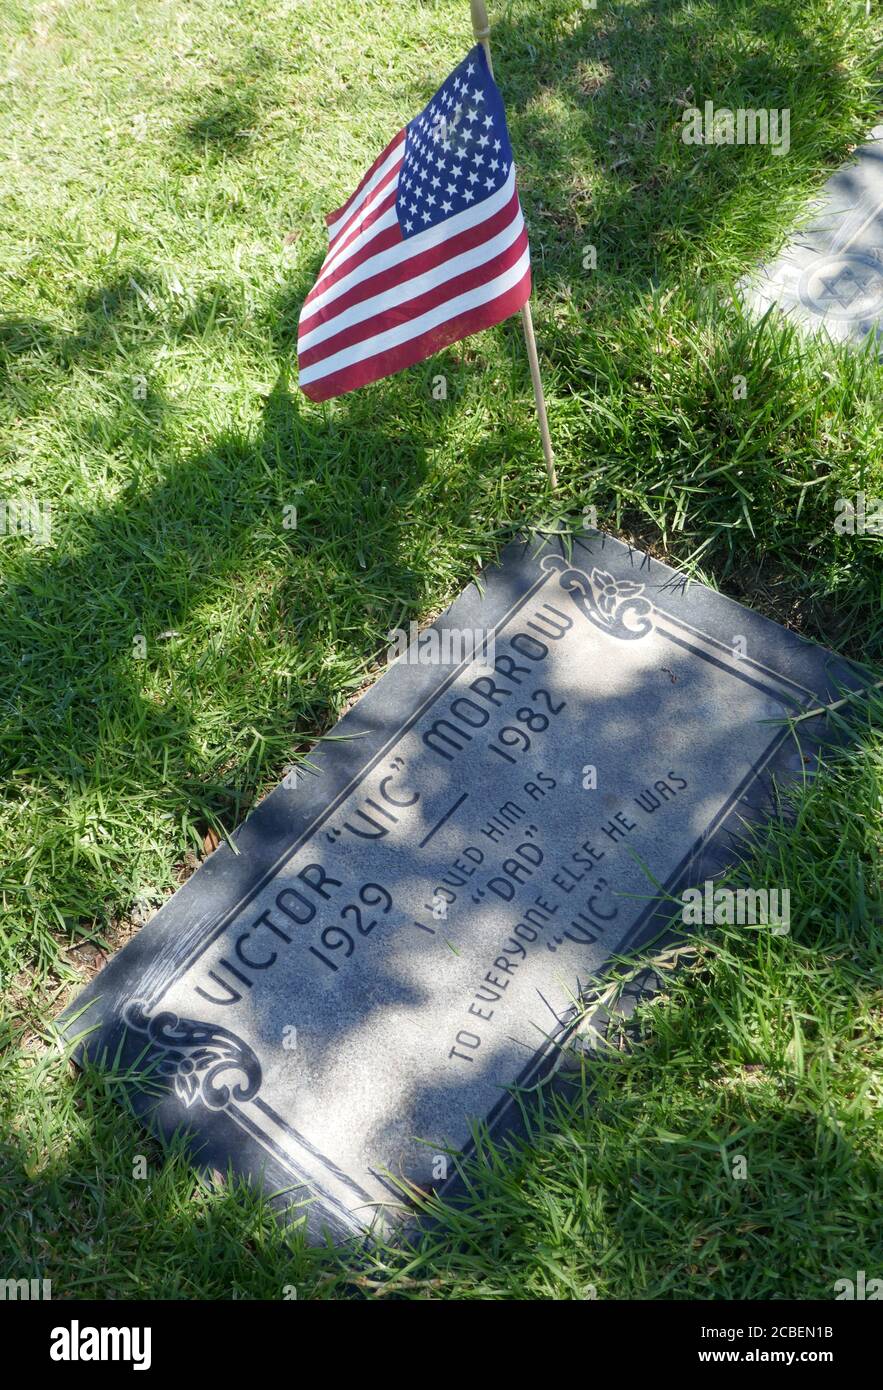 Culver City, California, USA 11th August 2020 A general view of atmosphere of actor Victor 'Vic' Morrow's Grave at Hillside Memorial Park on August 11, 2020 in Culver City, California, USA. Photo by Barry King/Alamy Stock Photo Stock Photo